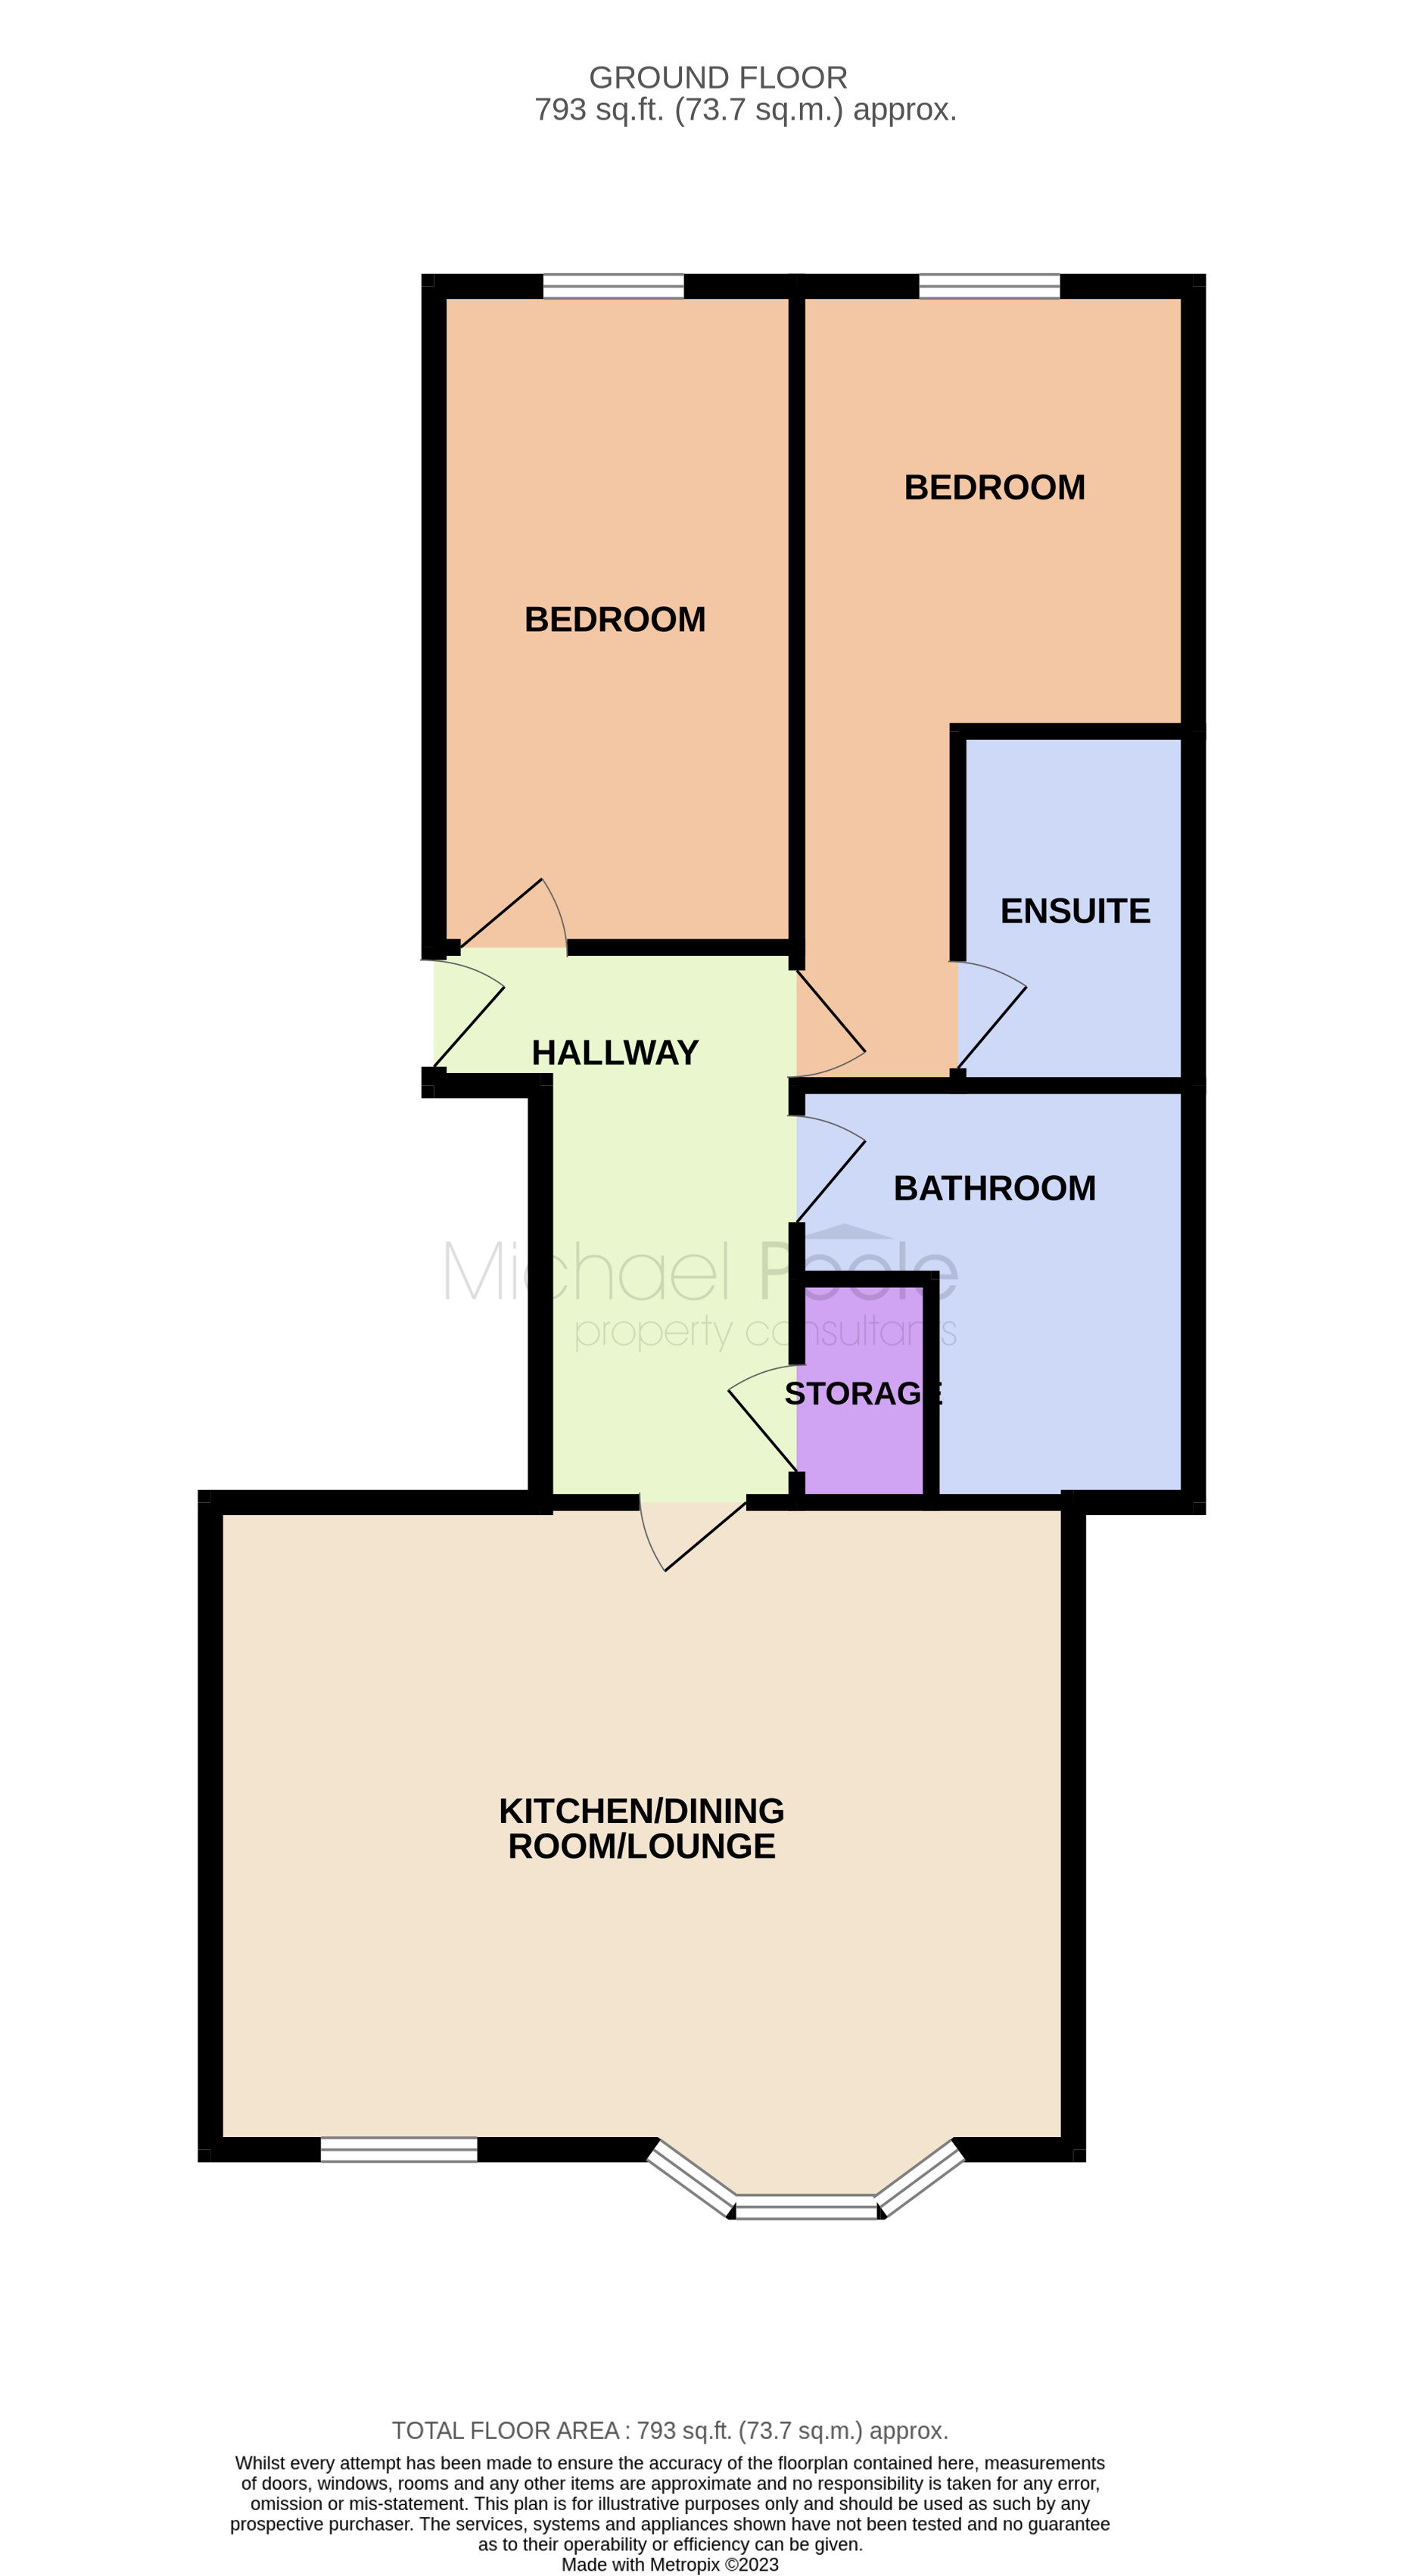 2 bed apartment for sale - Property floorplan